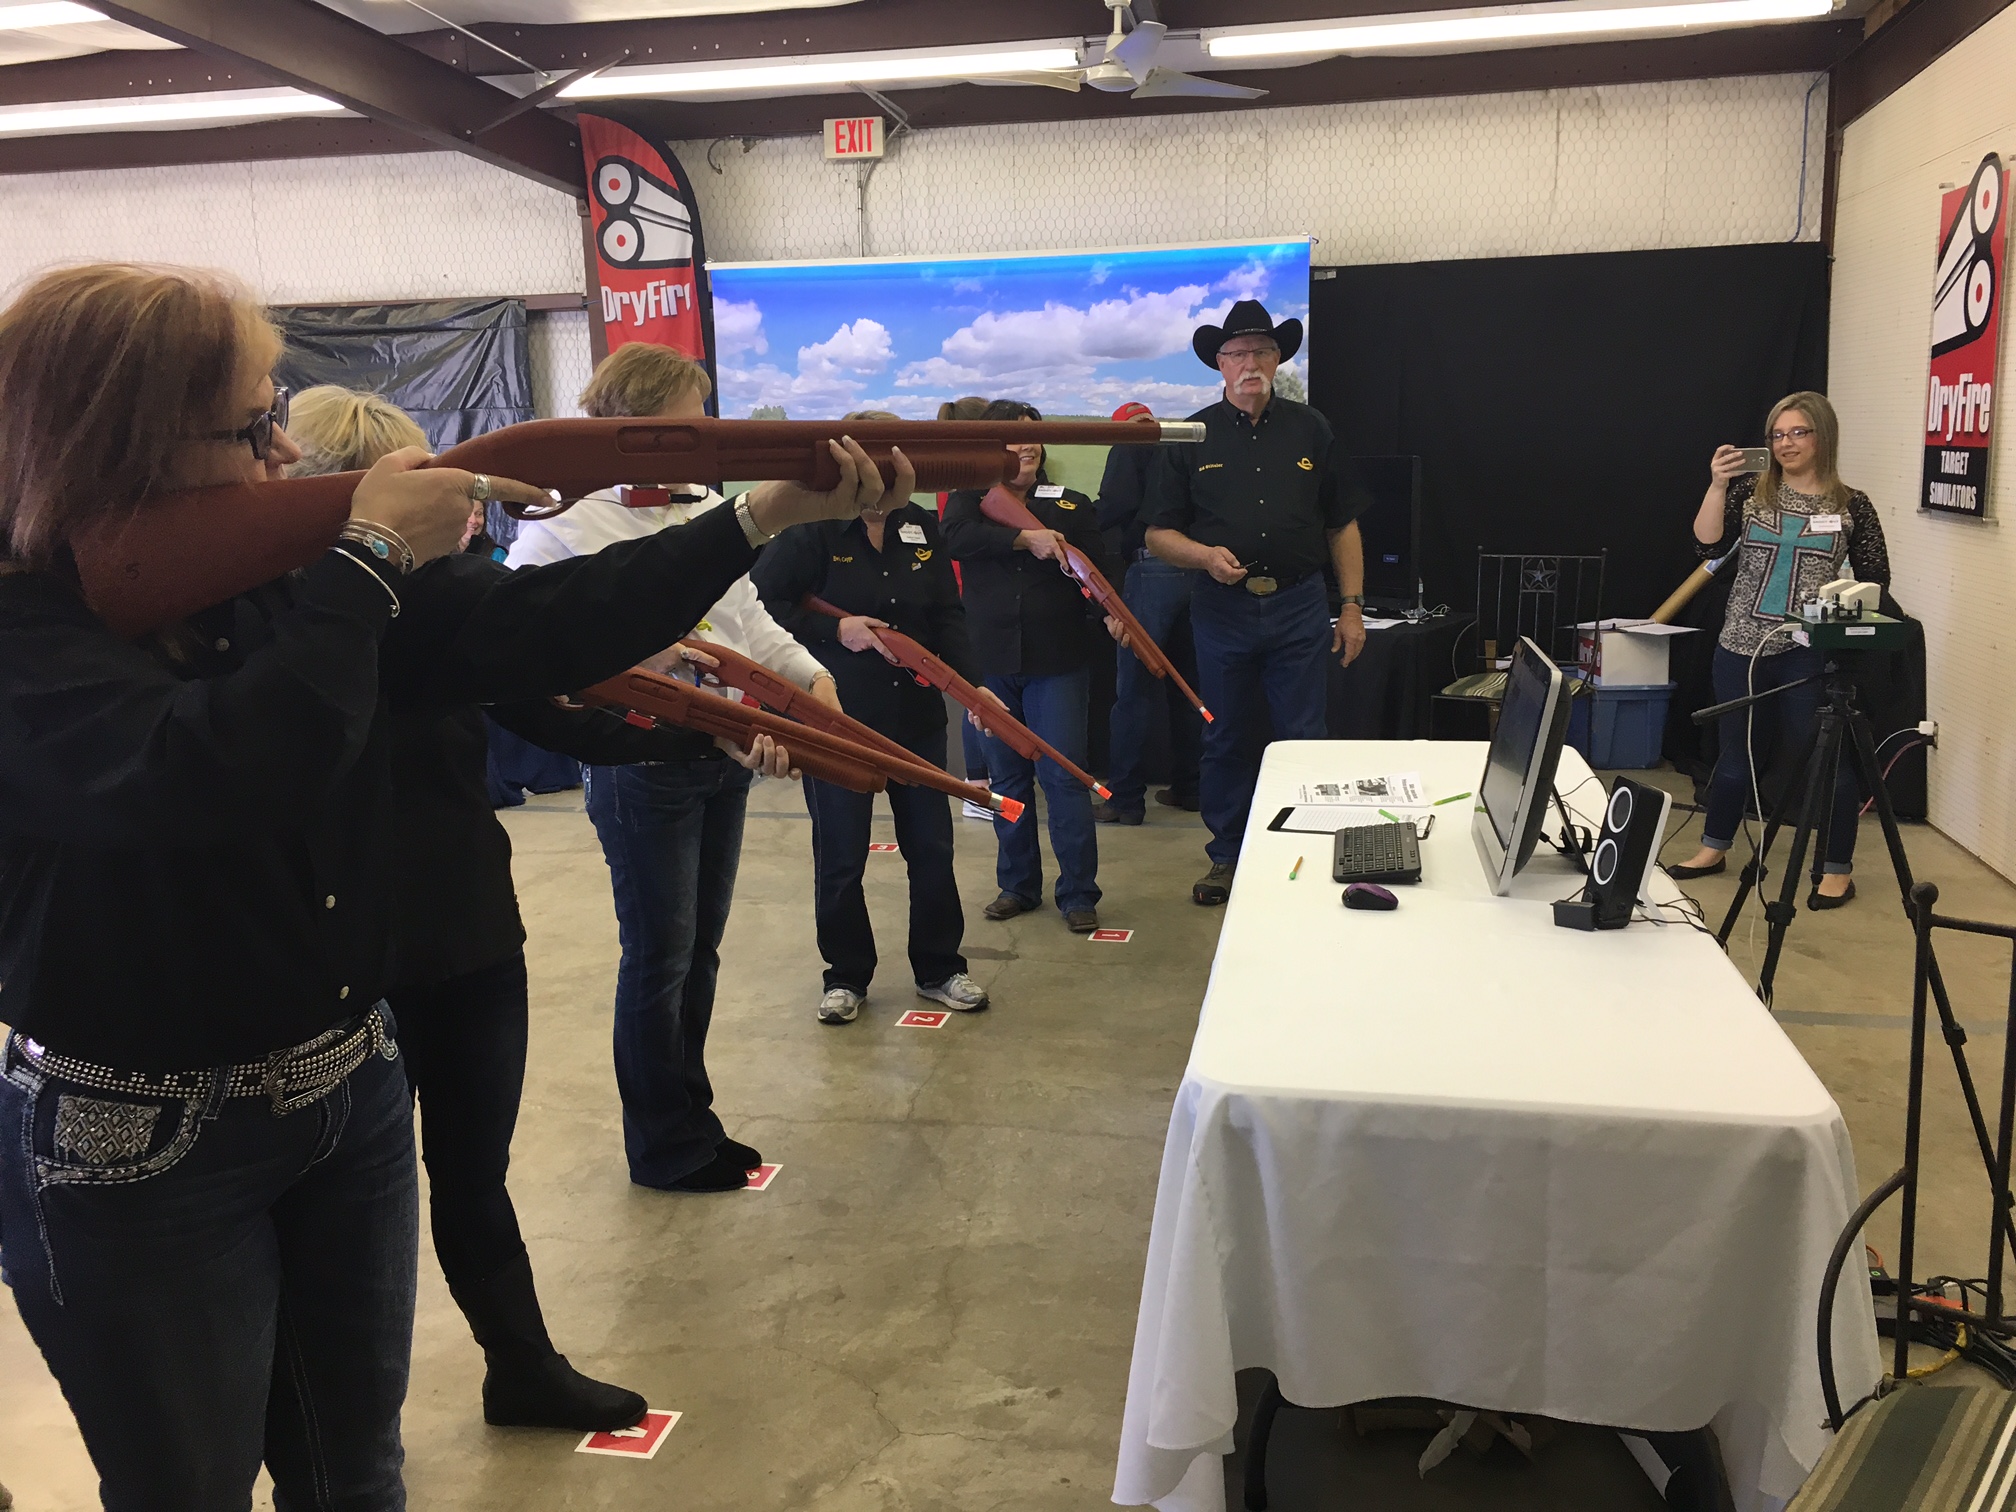 Trapshooters in a squad practicing indoor with DryFire target simulator